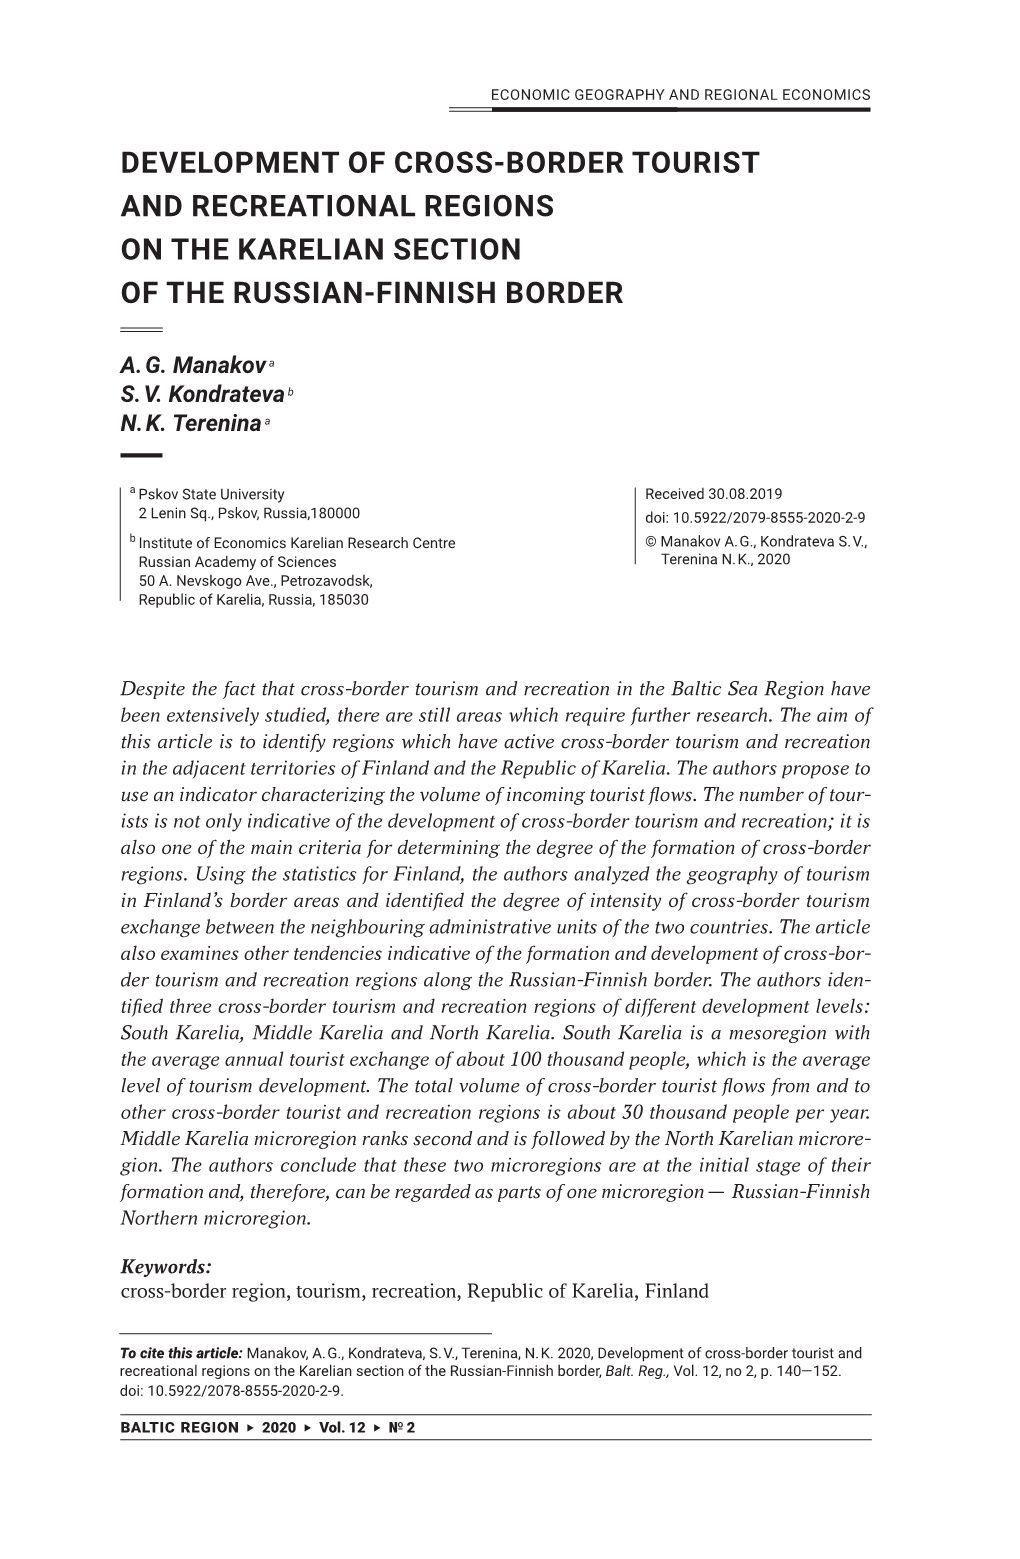 Development of Cross-Border Tourist and Recreational Regions on the Karelian Section of the Russian-Finnish Border